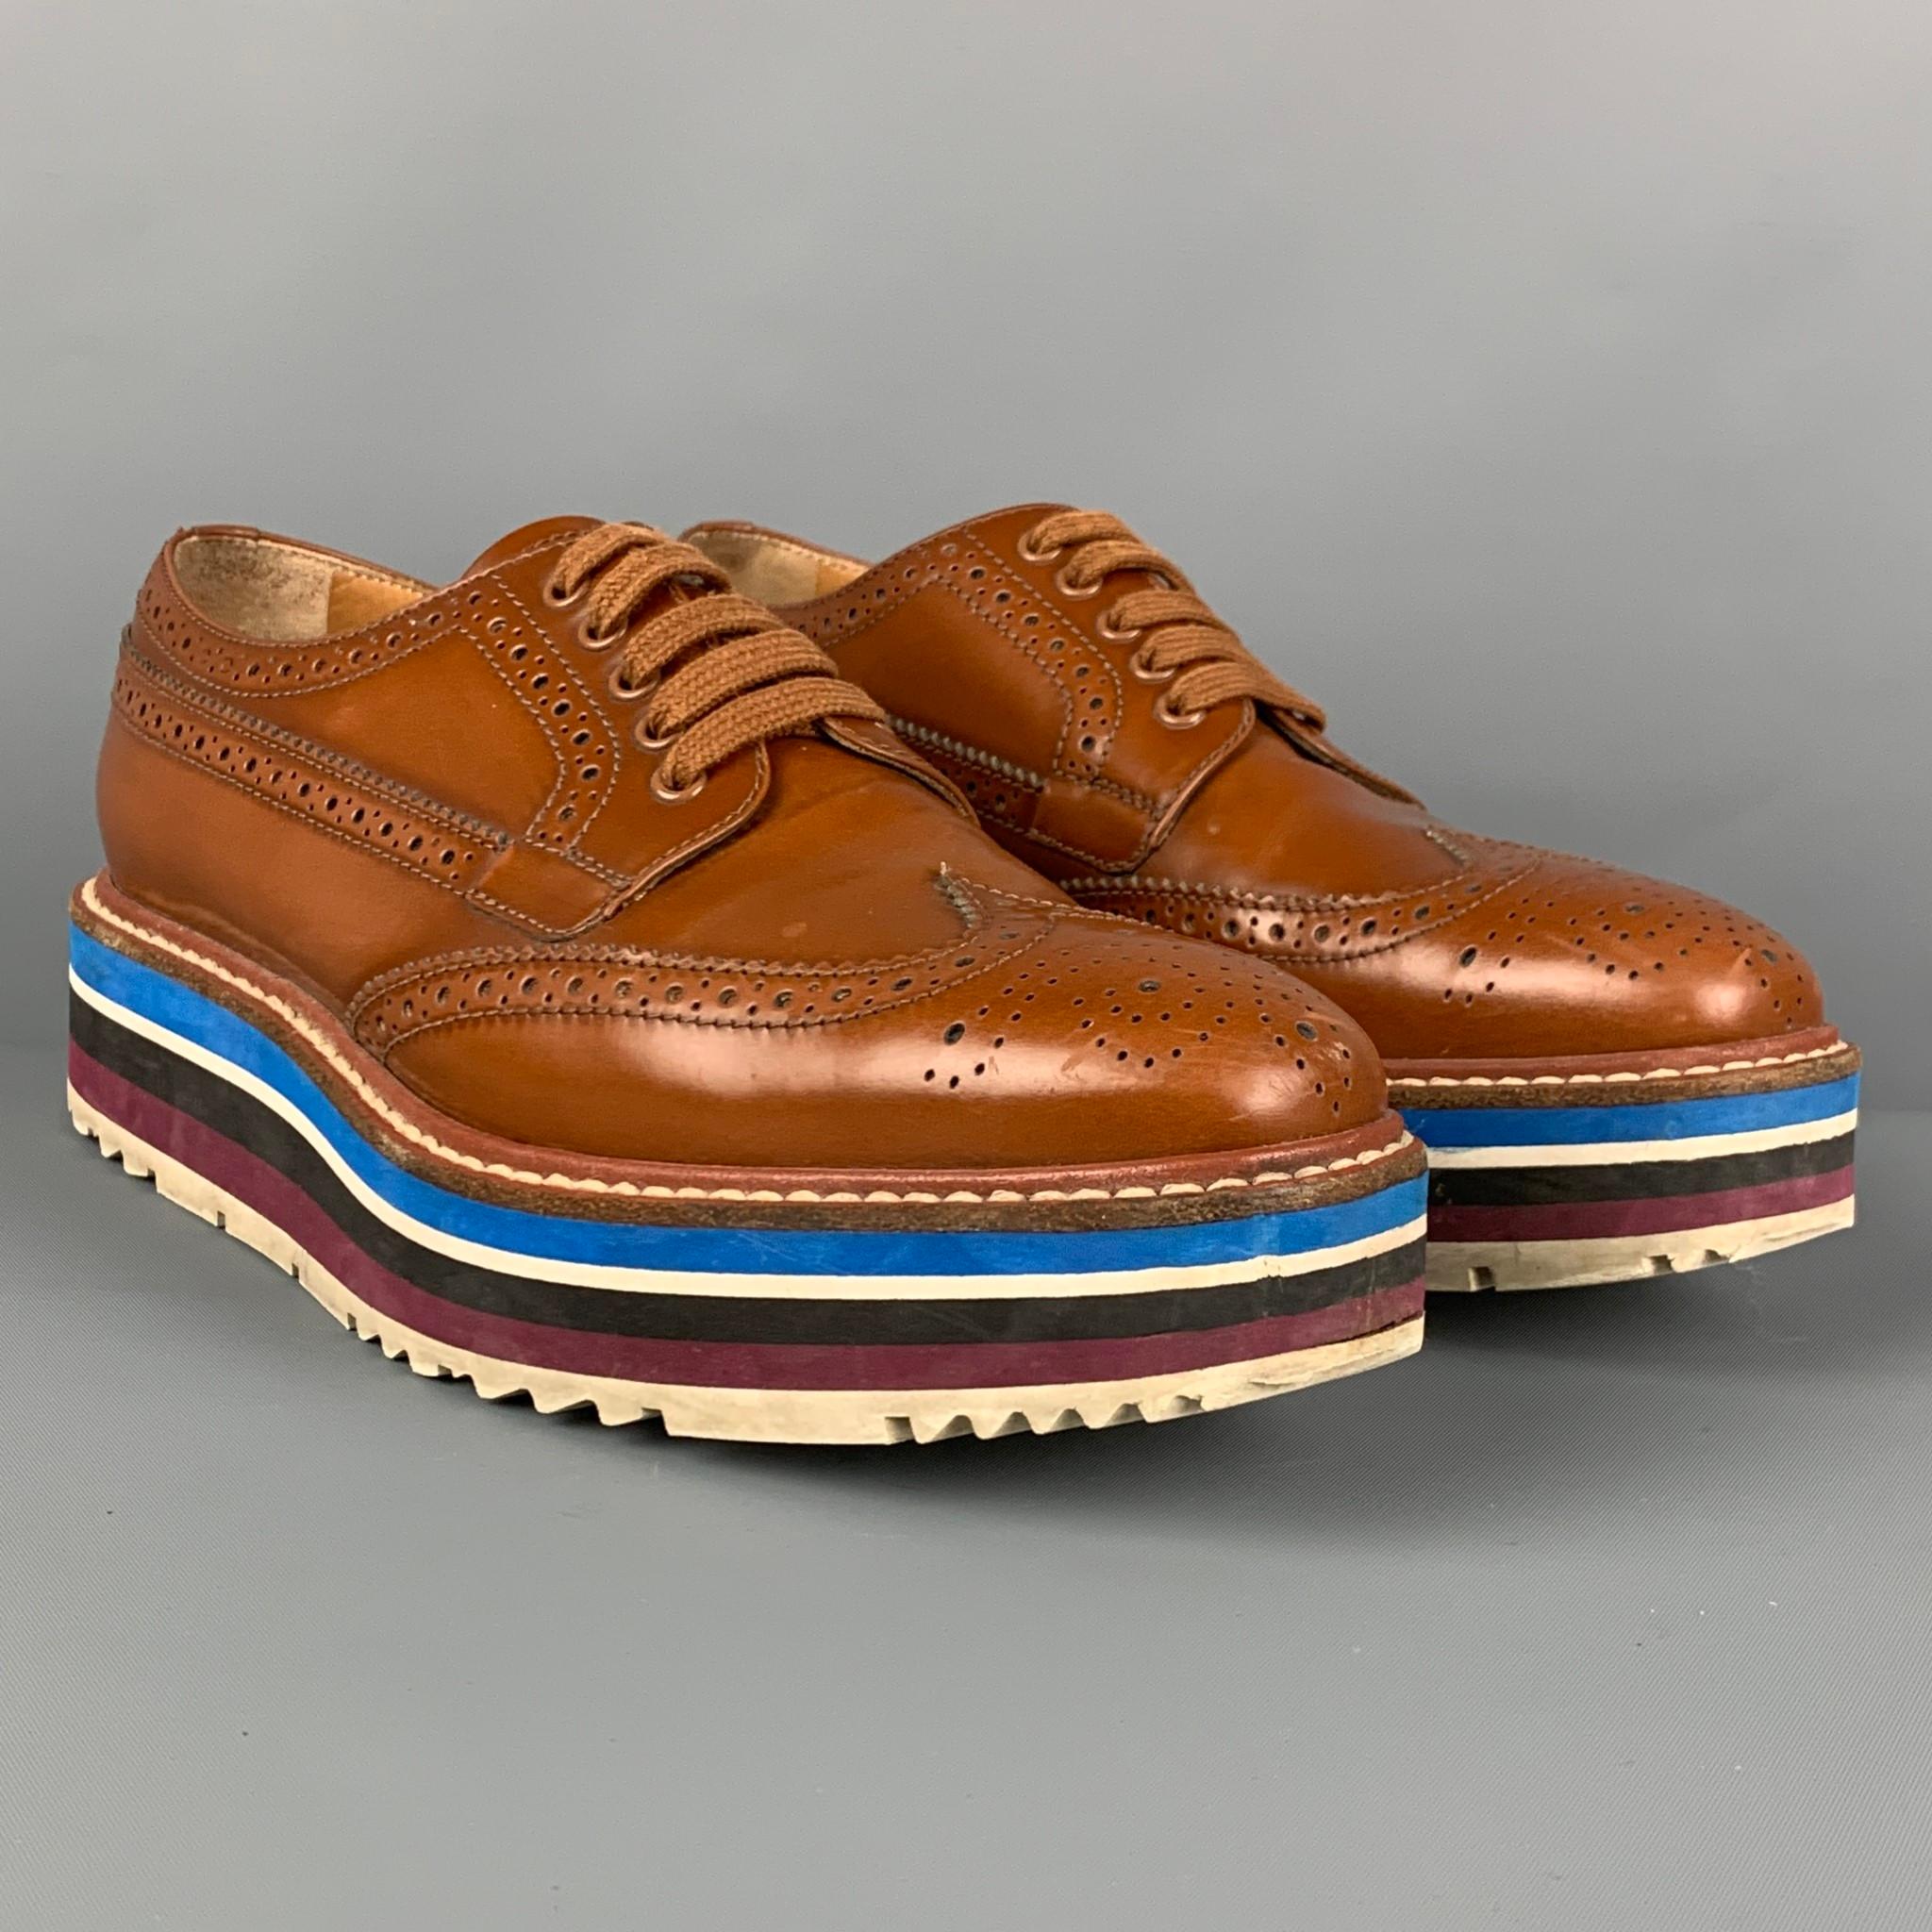 PRADA shoes comes in a tan perforated leather featuring a wingtip style, rubber platform sole, and a lace up closure. Made in Italy. 

Very Good Pre-Owned Condition.
Marked: 36

Outsole: 10.5 x 3.5 in. 